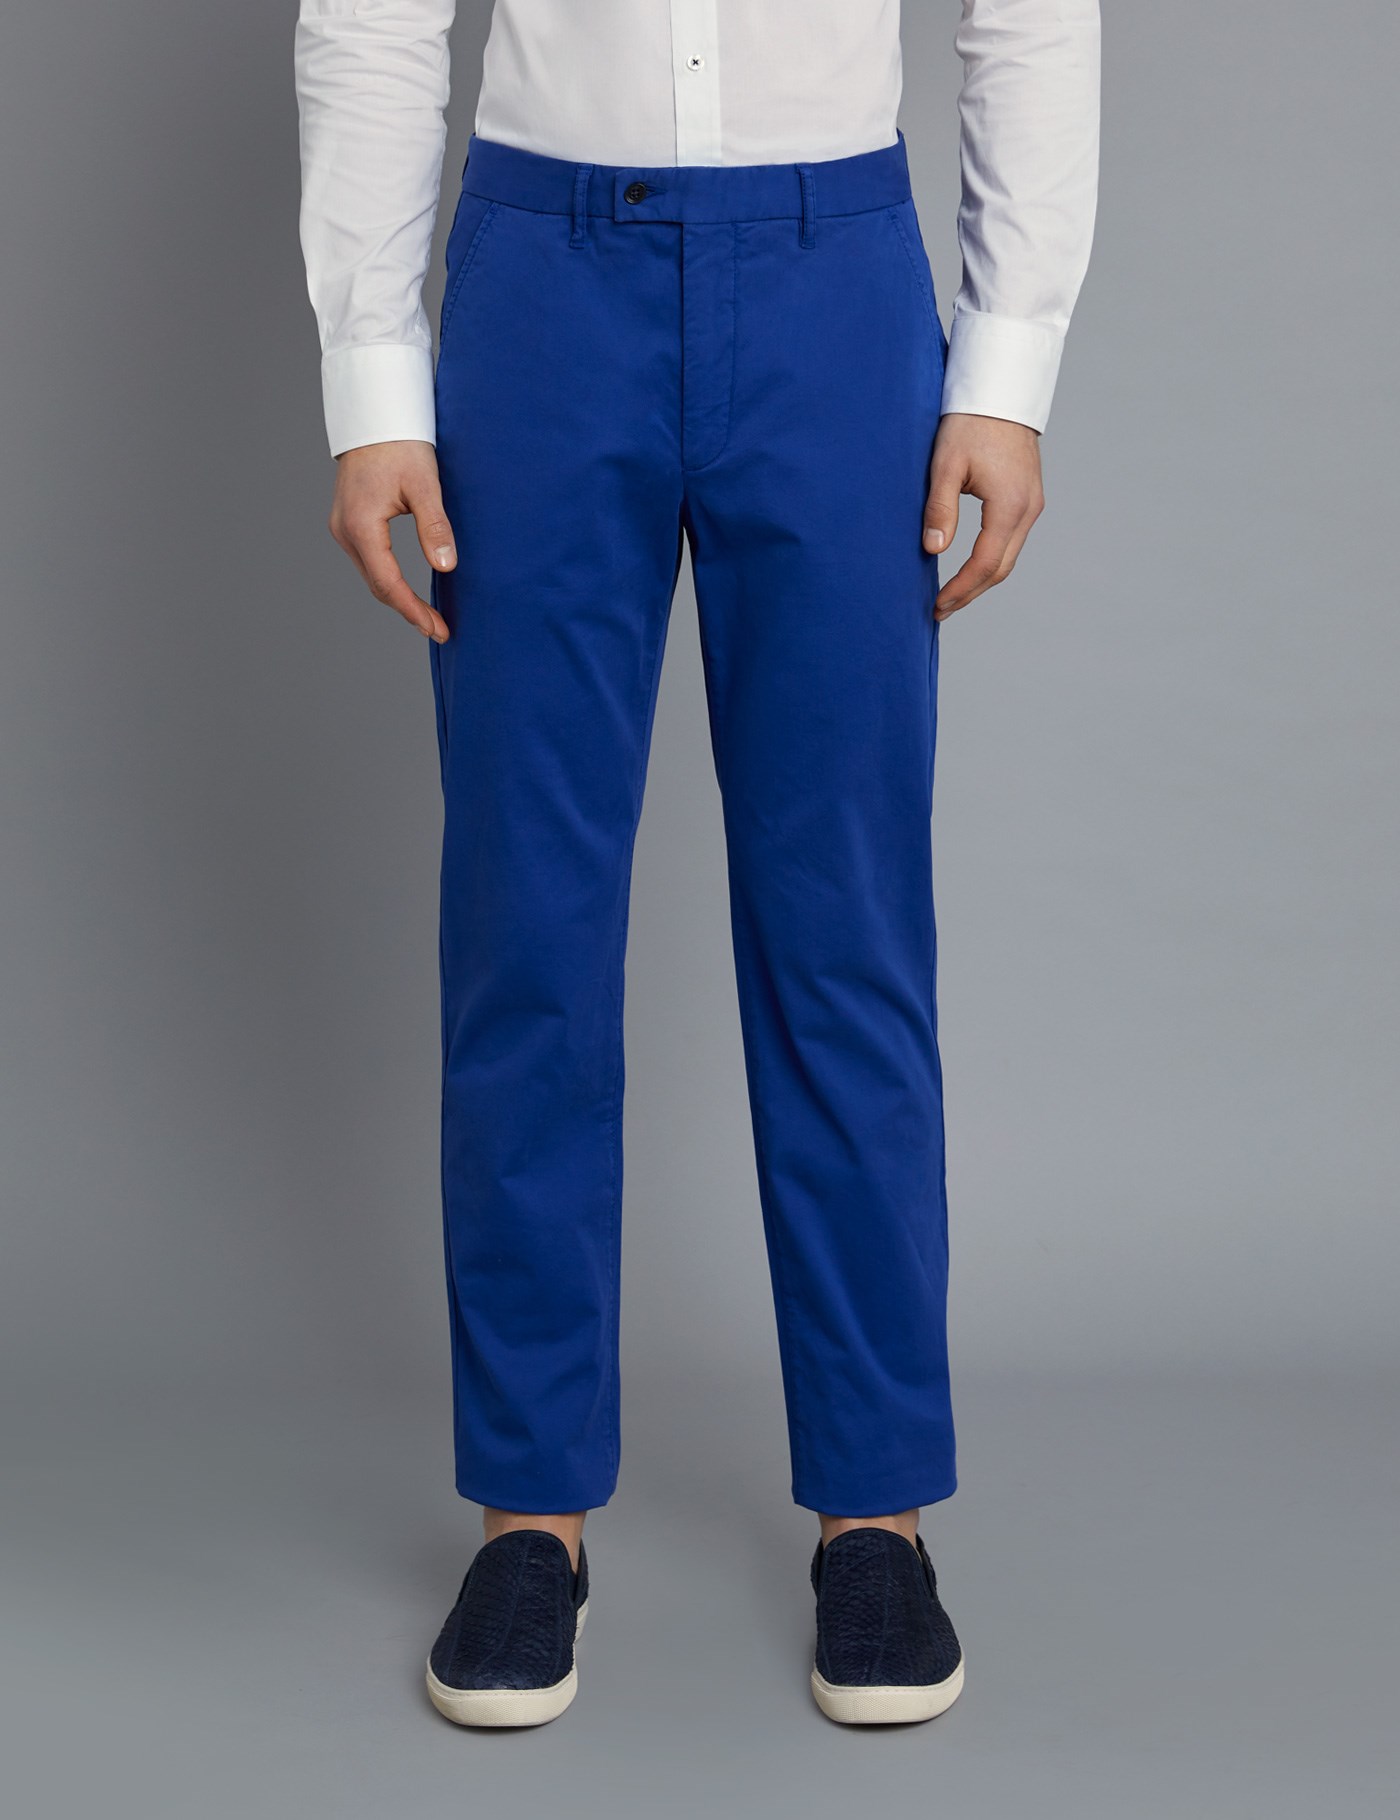 Men's Blue Garment Dye Classic Fit Chinos | Hawes & Curtis